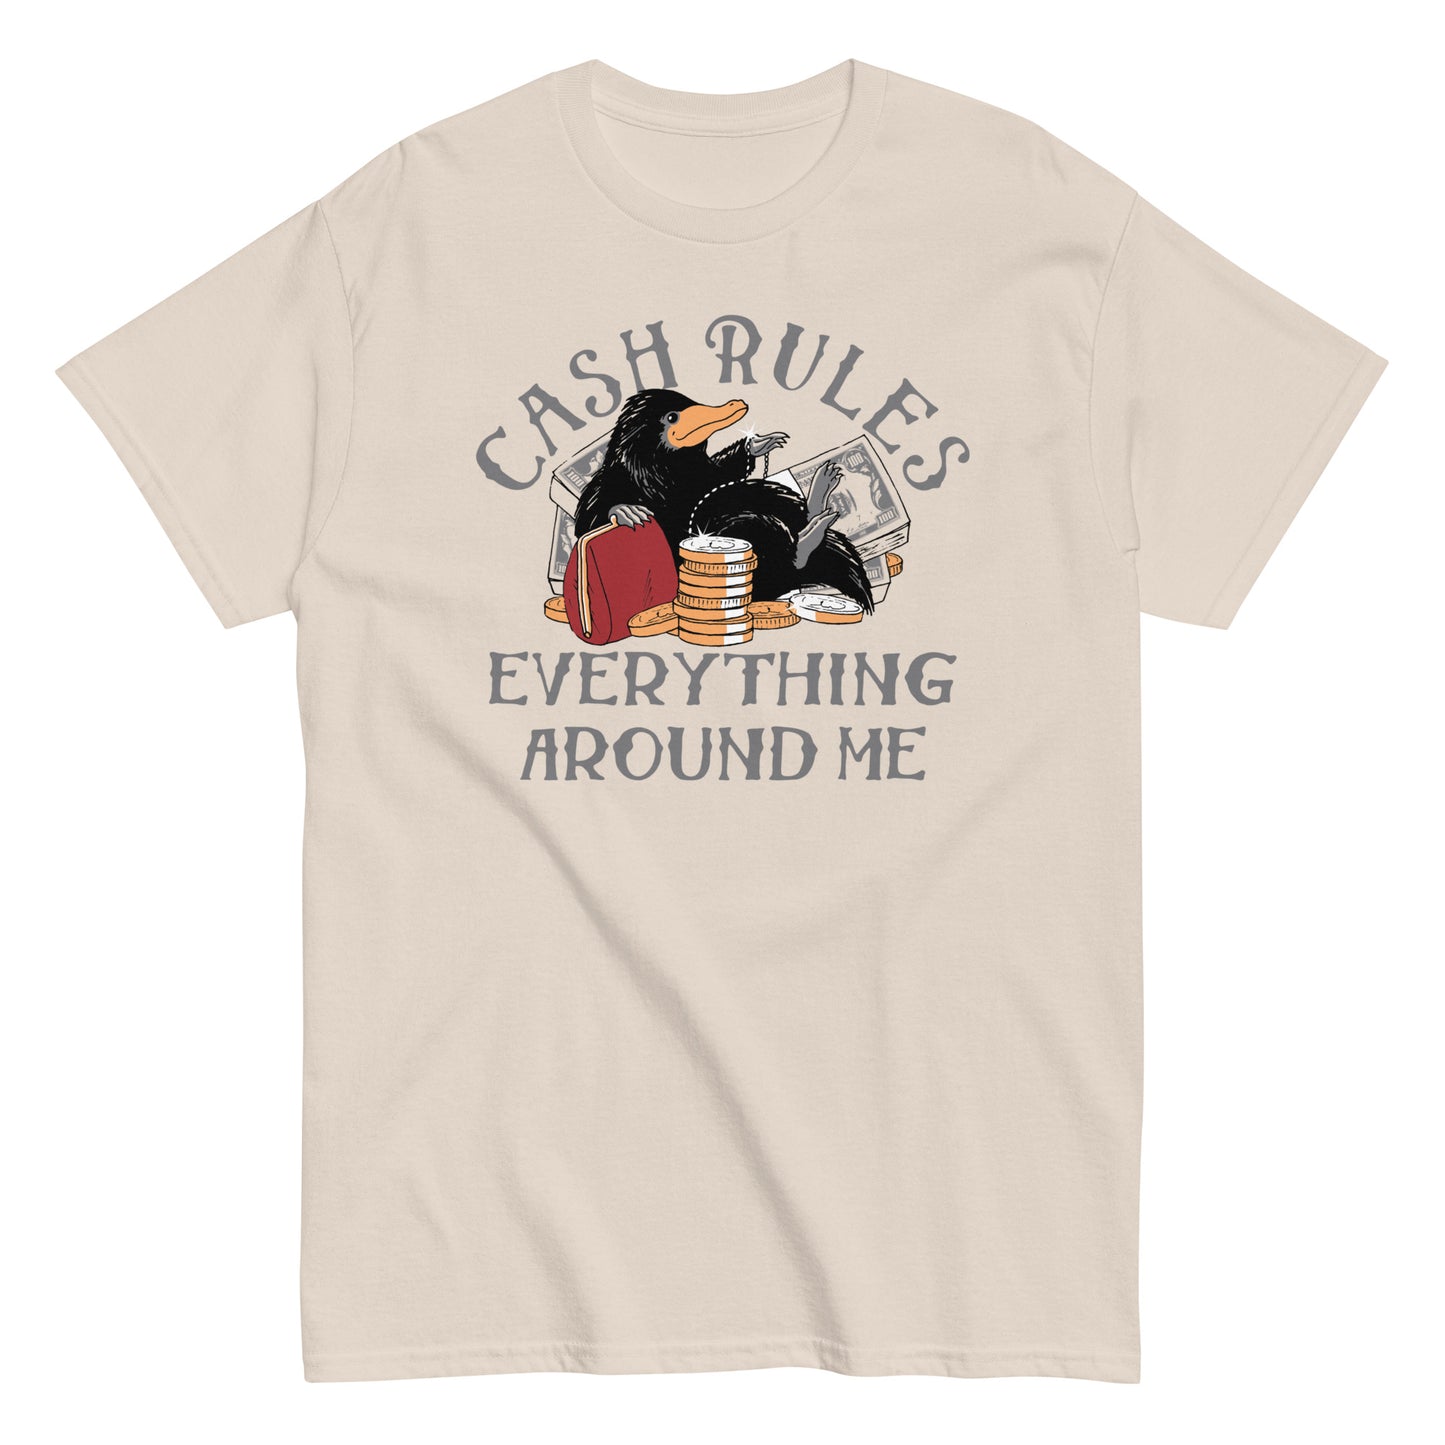 Cash Rules Everything Around Me Men's Classic Tee